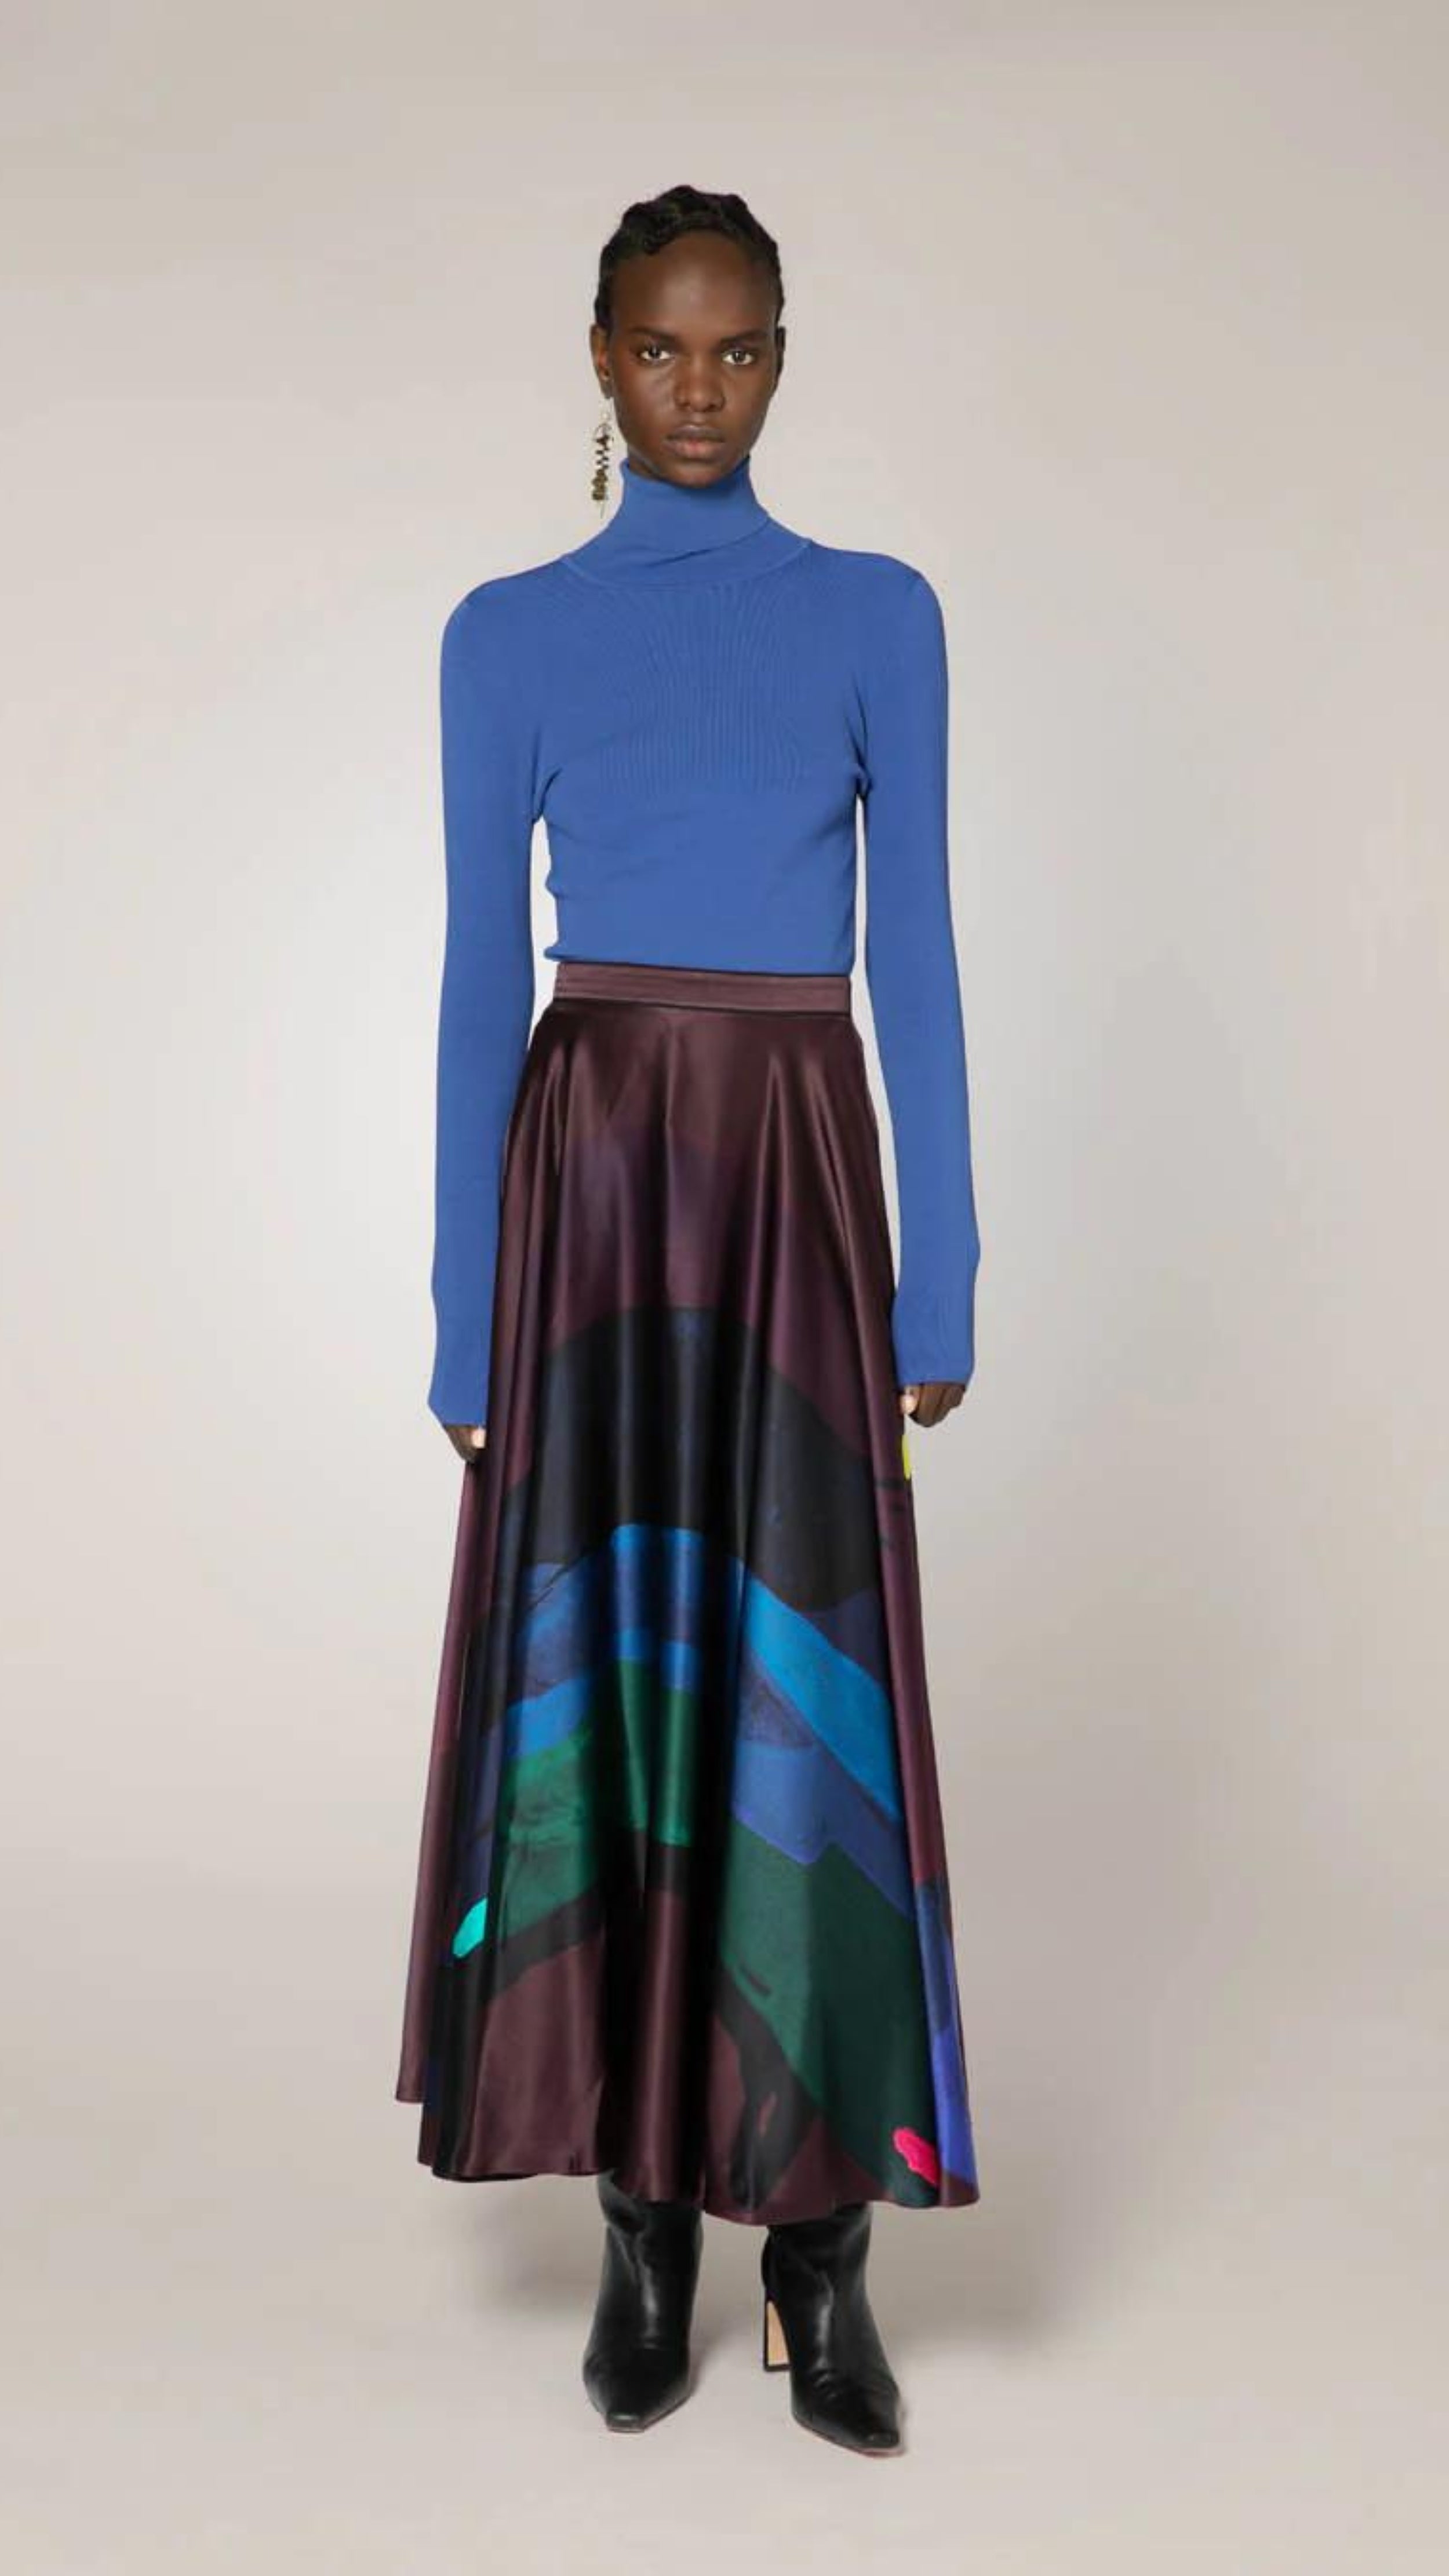 Roksanda Ameera Skirt in silk. Organic painted pattern of rich plum, blue and green colors. With a fitted band waist and hidden back zipper. This is a floor length skirt. Shown in the model facing front.